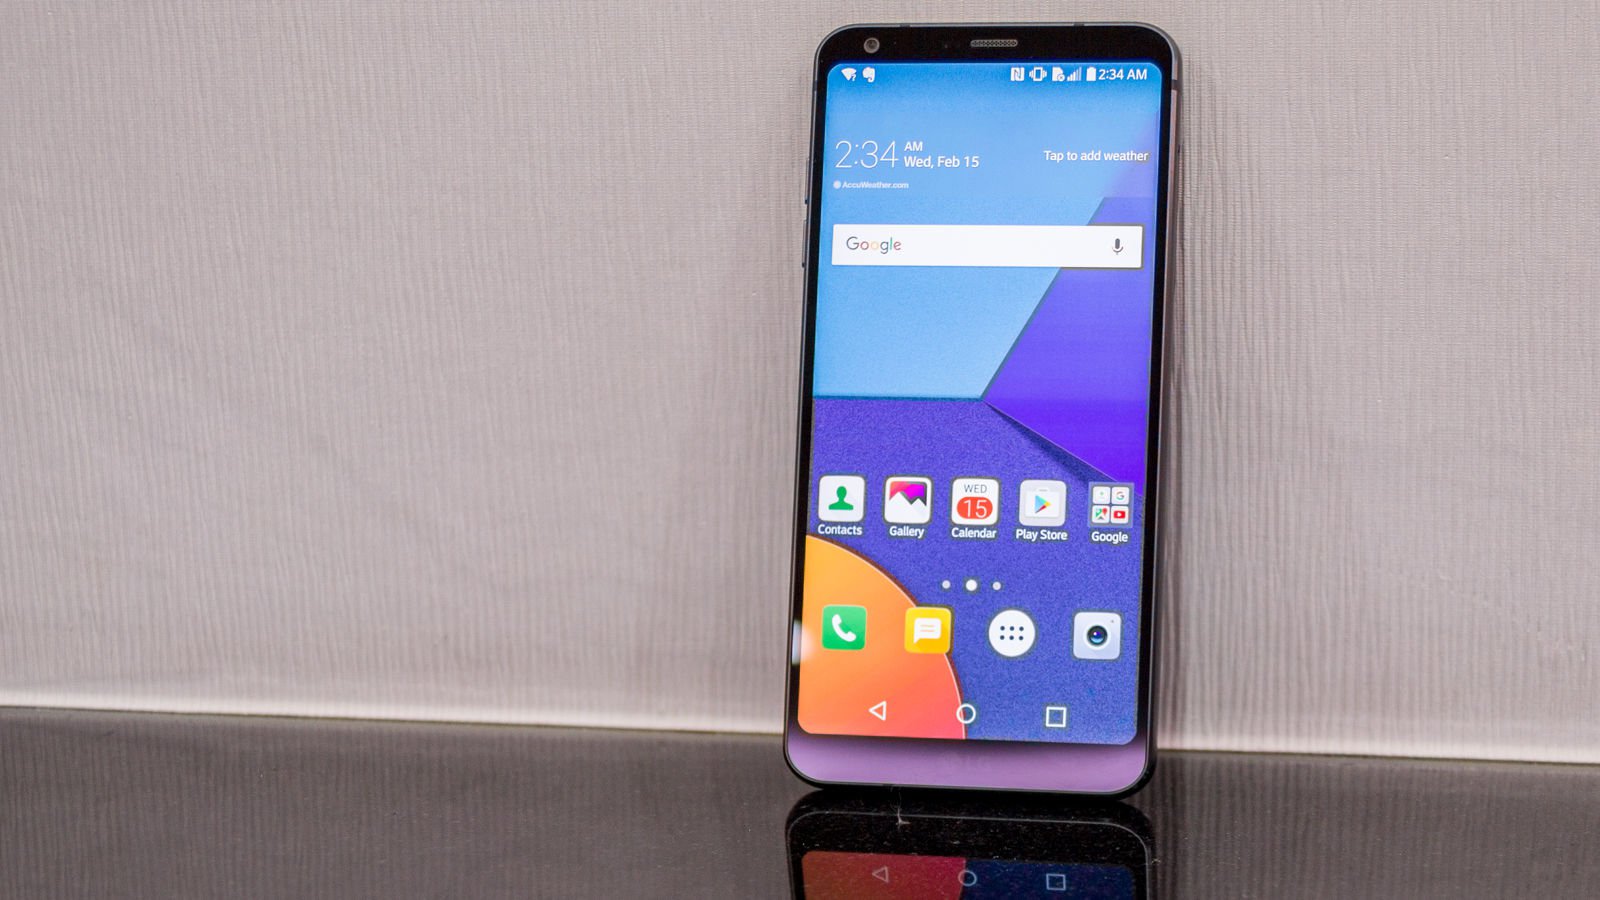 LG G6 will cost quite a bit